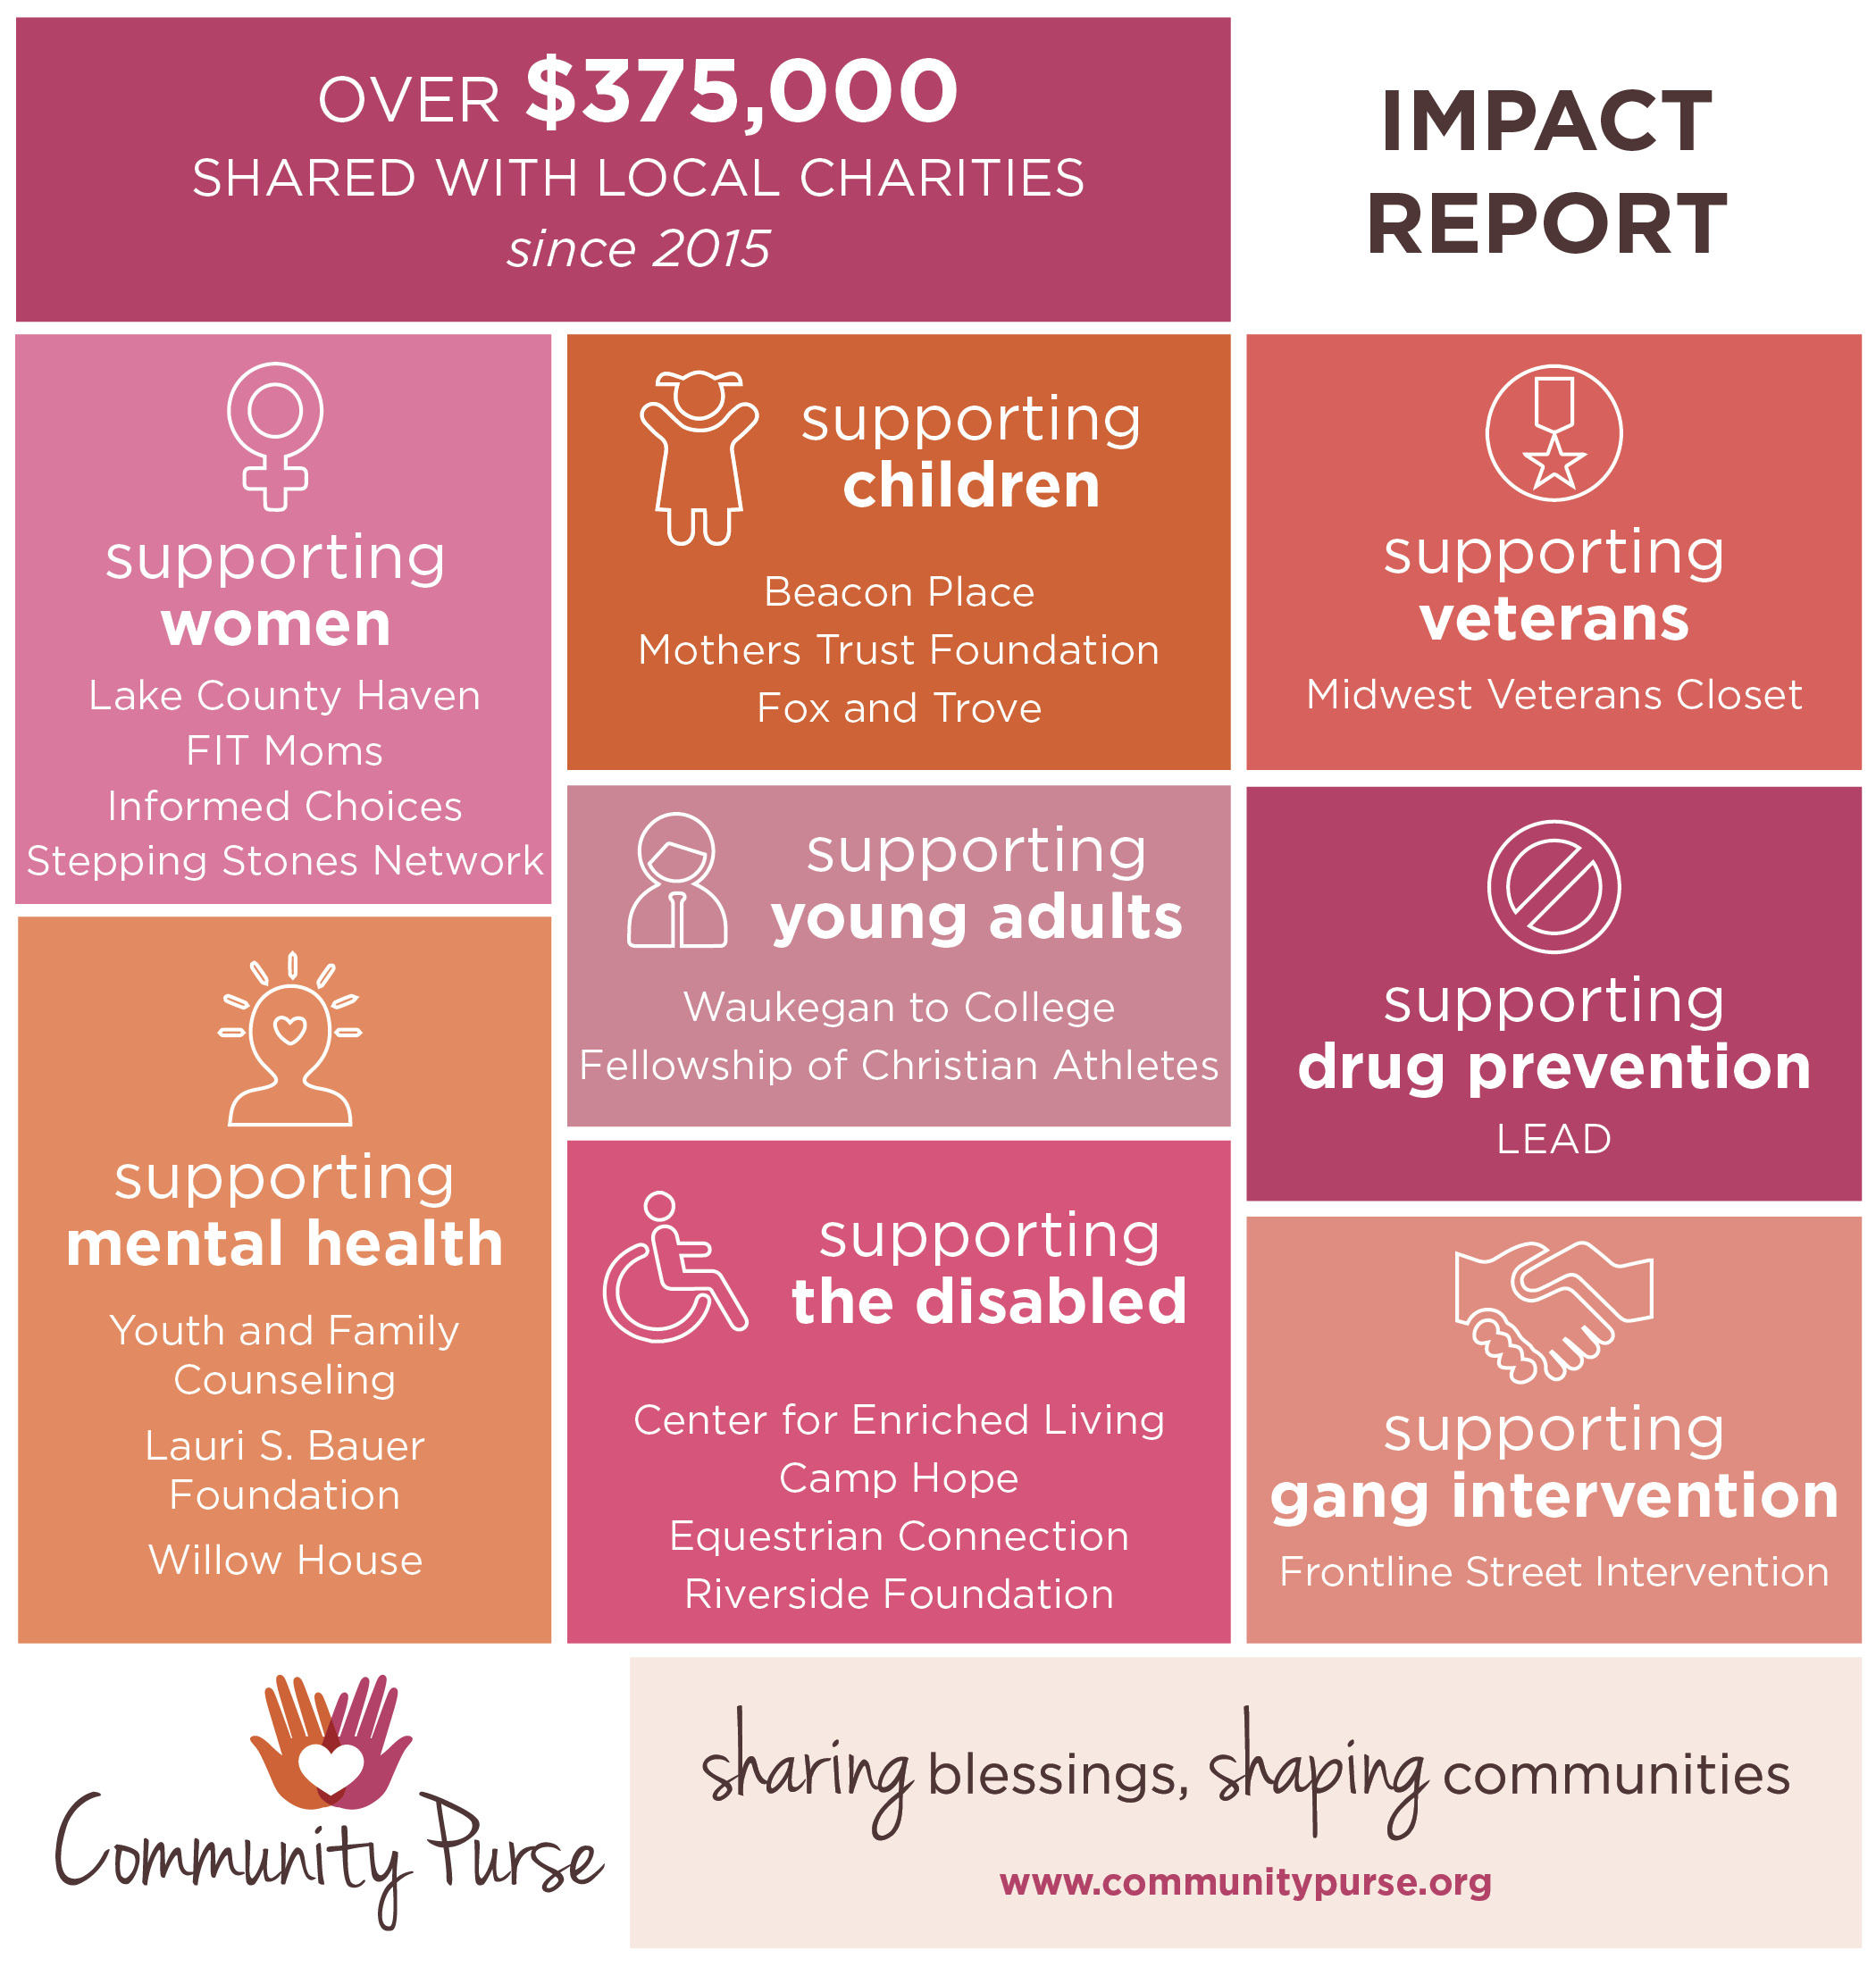 Community Purse Impact Report over $375,000 given